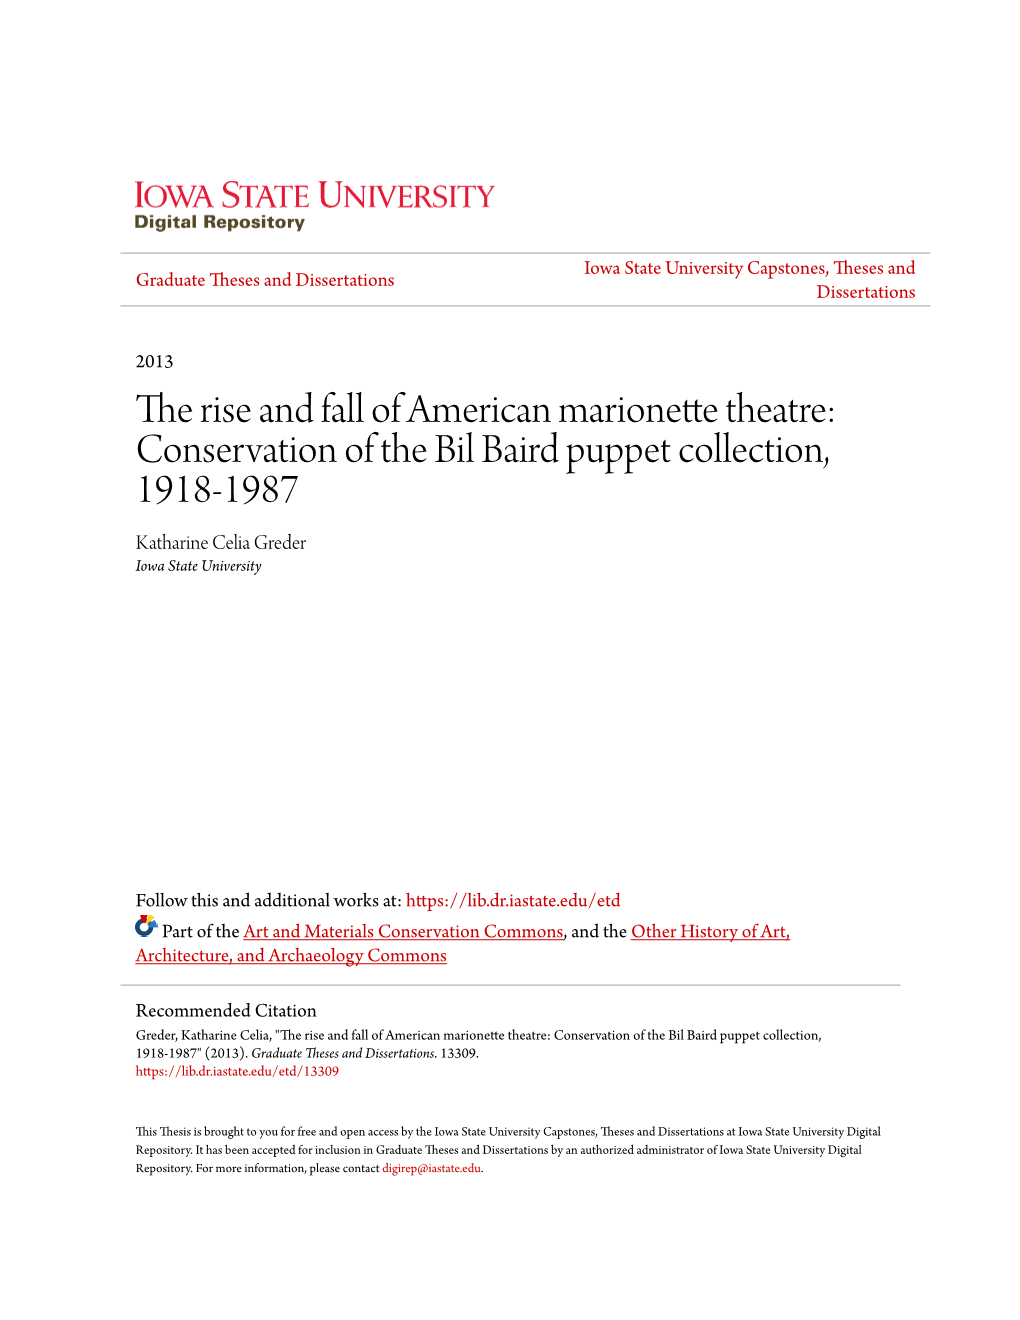 The Rise and Fall of American Marionette Theatre: Conservation of the Bil Baird Puppet Collection, 1918-1987 Katharine Celia Greder Iowa State University